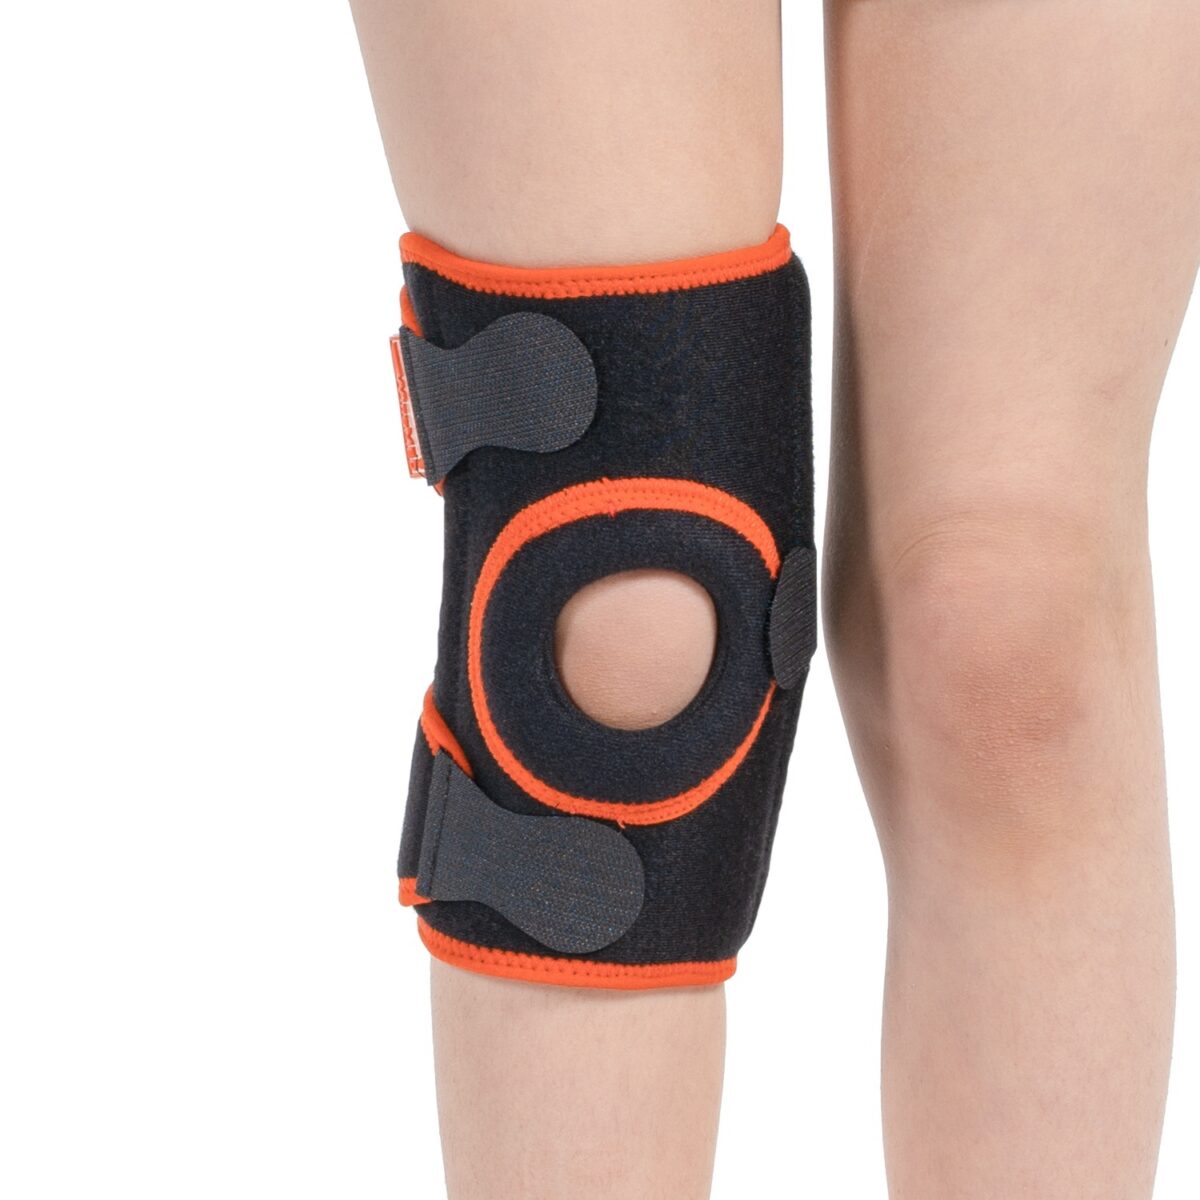 wingmed orthopedic equipments W918 ligament knee support 92